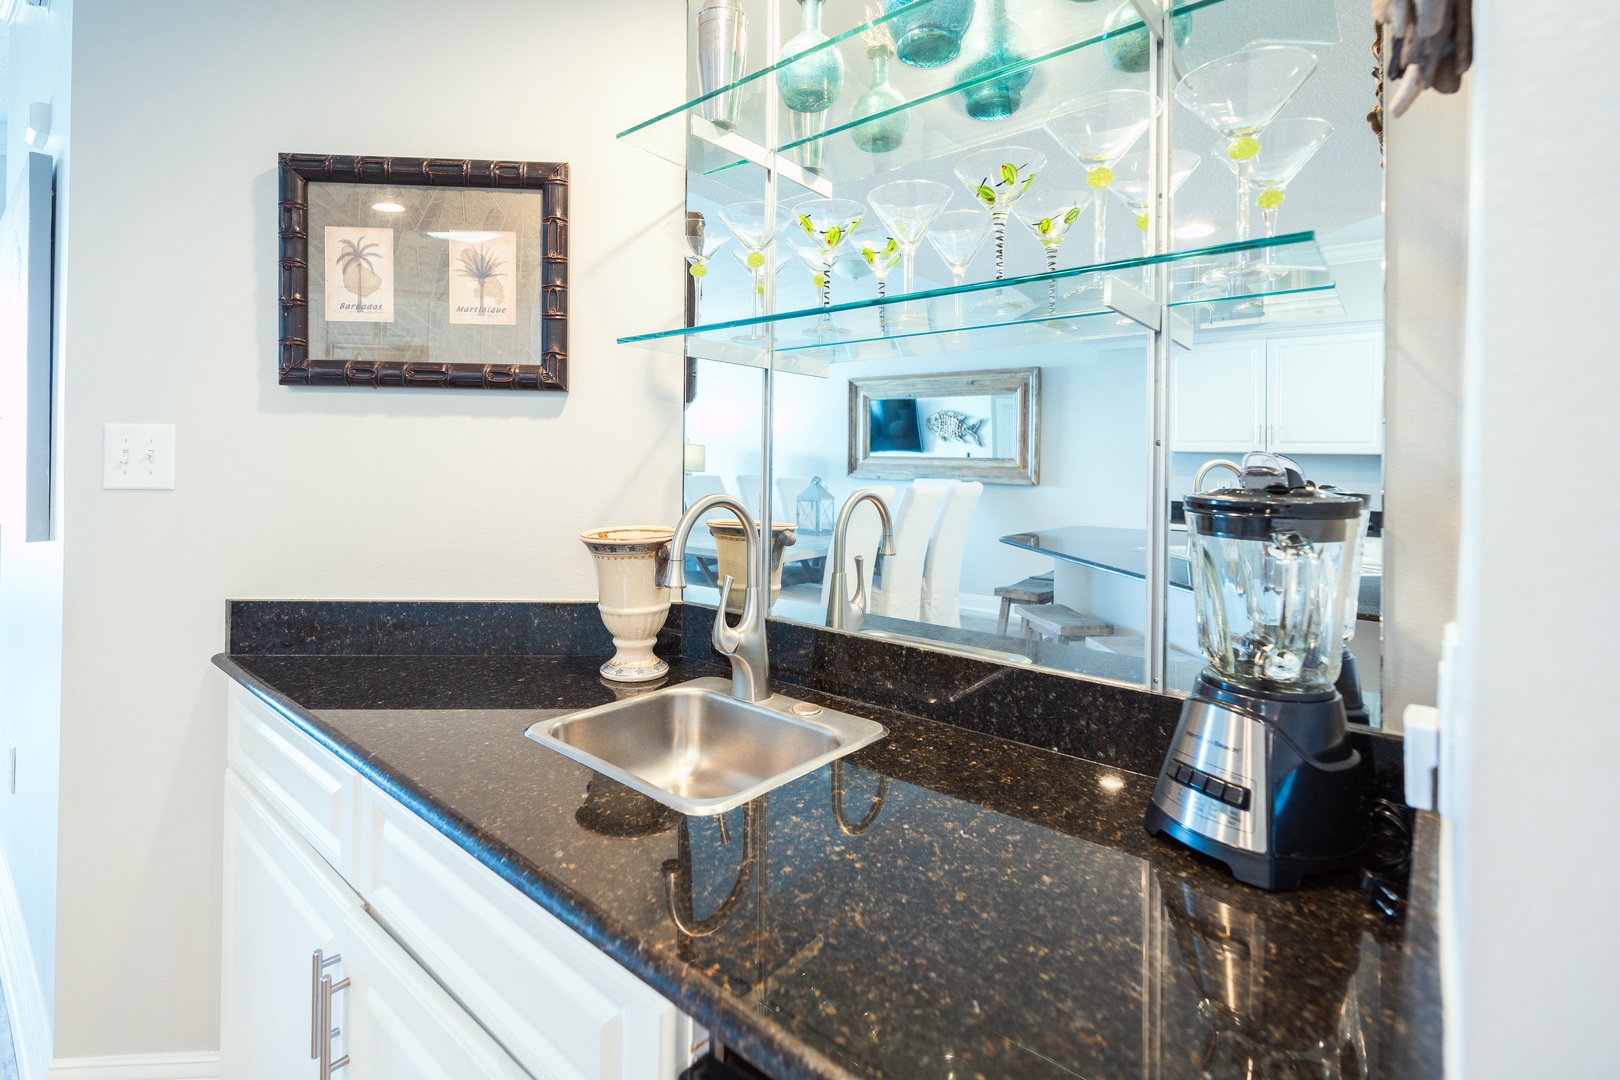 Prepare fabulous beverages at the wet bar, just off the kitchen